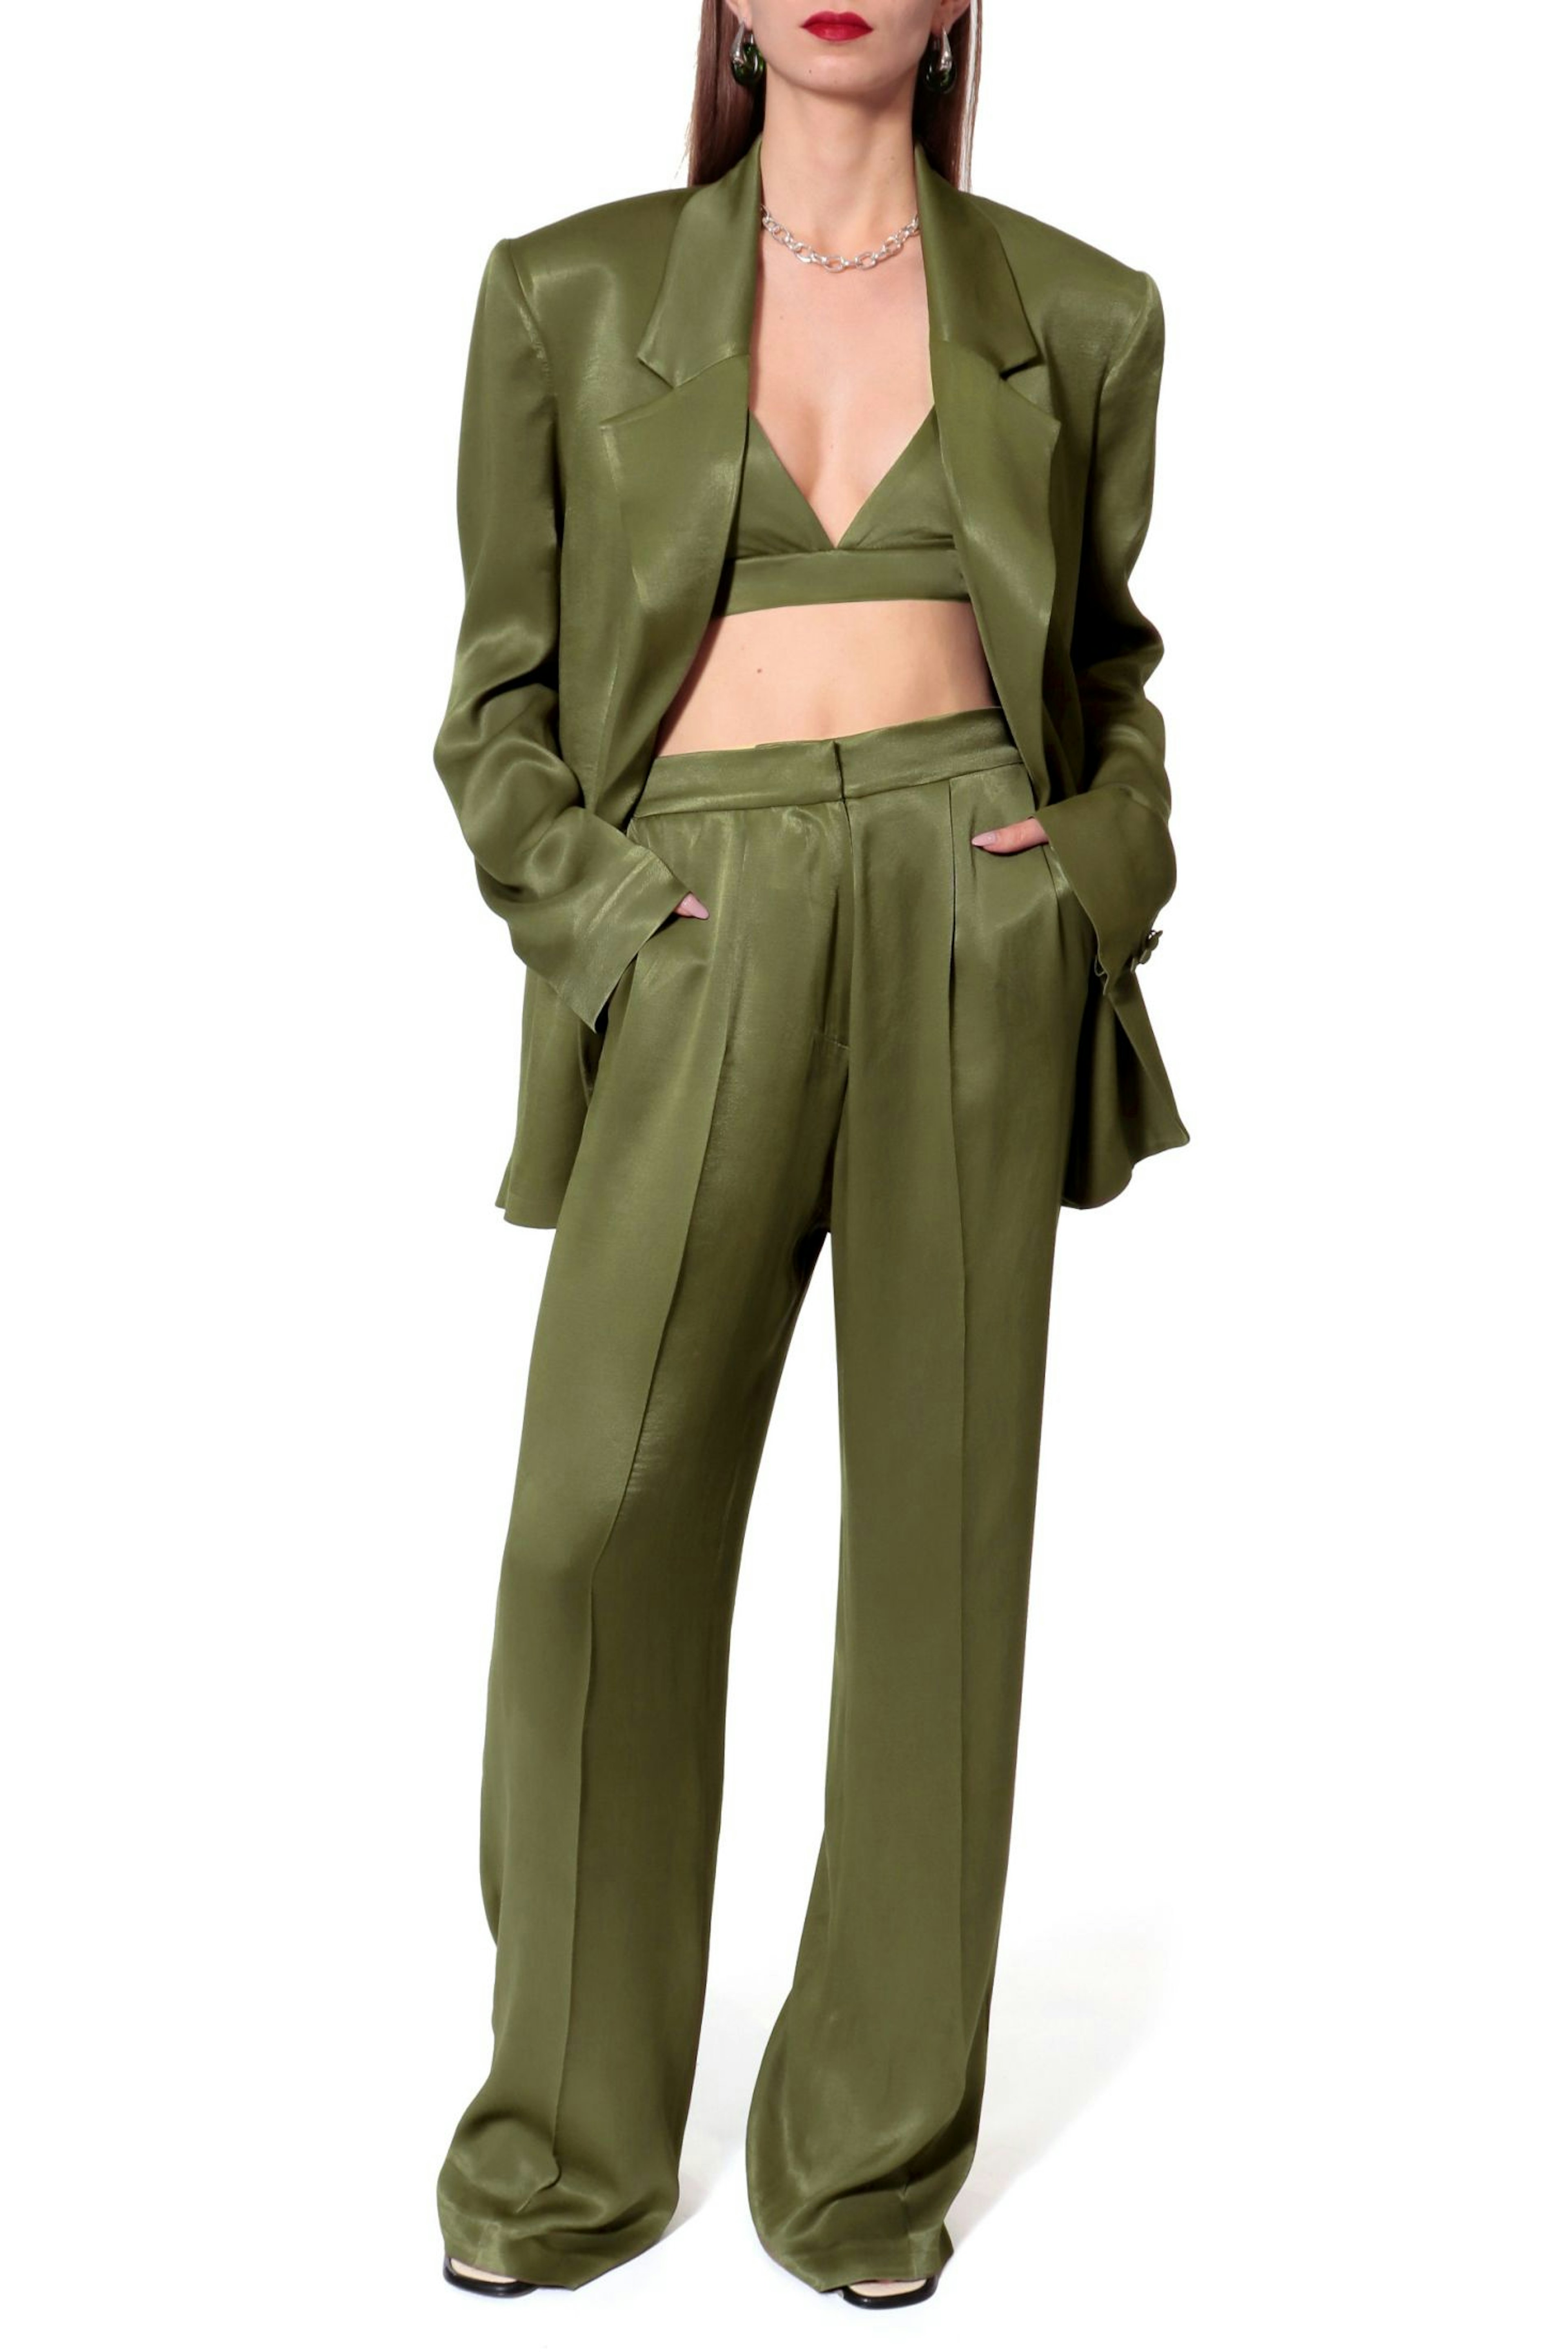 Shop Bralette top Asha Satin Olive Branch from AGGI at Seezona